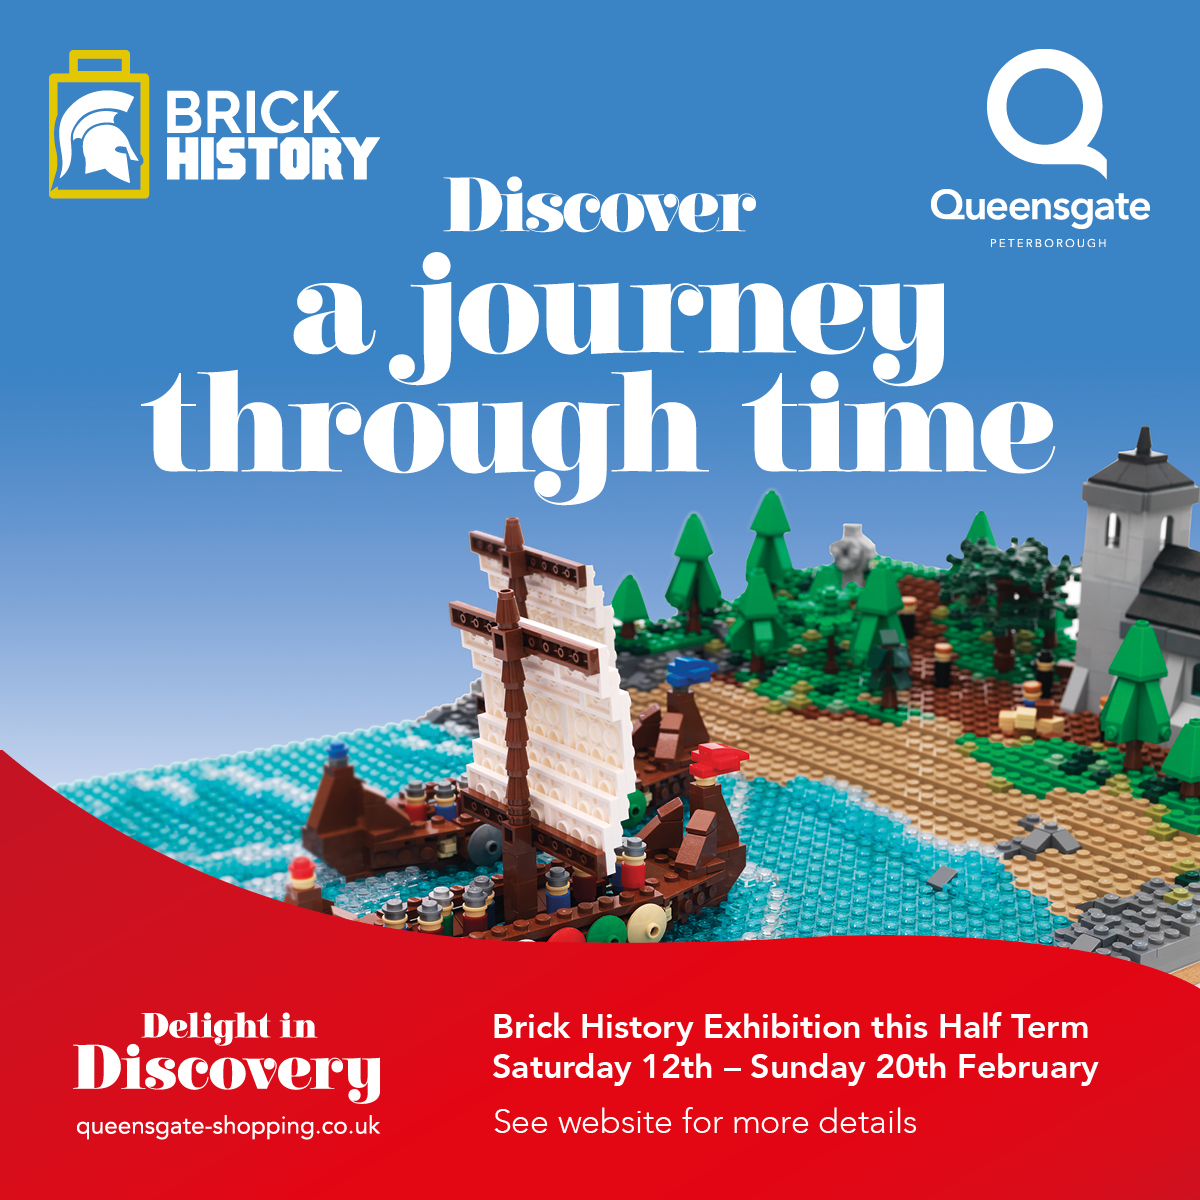 Join us this Half Term for a journey through time at our Brick History Exhibition! Brick History takes famous moments from history & imagines them in LEGO® bricks - how many will you recognise? This is a FREE event & will be open within the normal shopping centre opening hours.